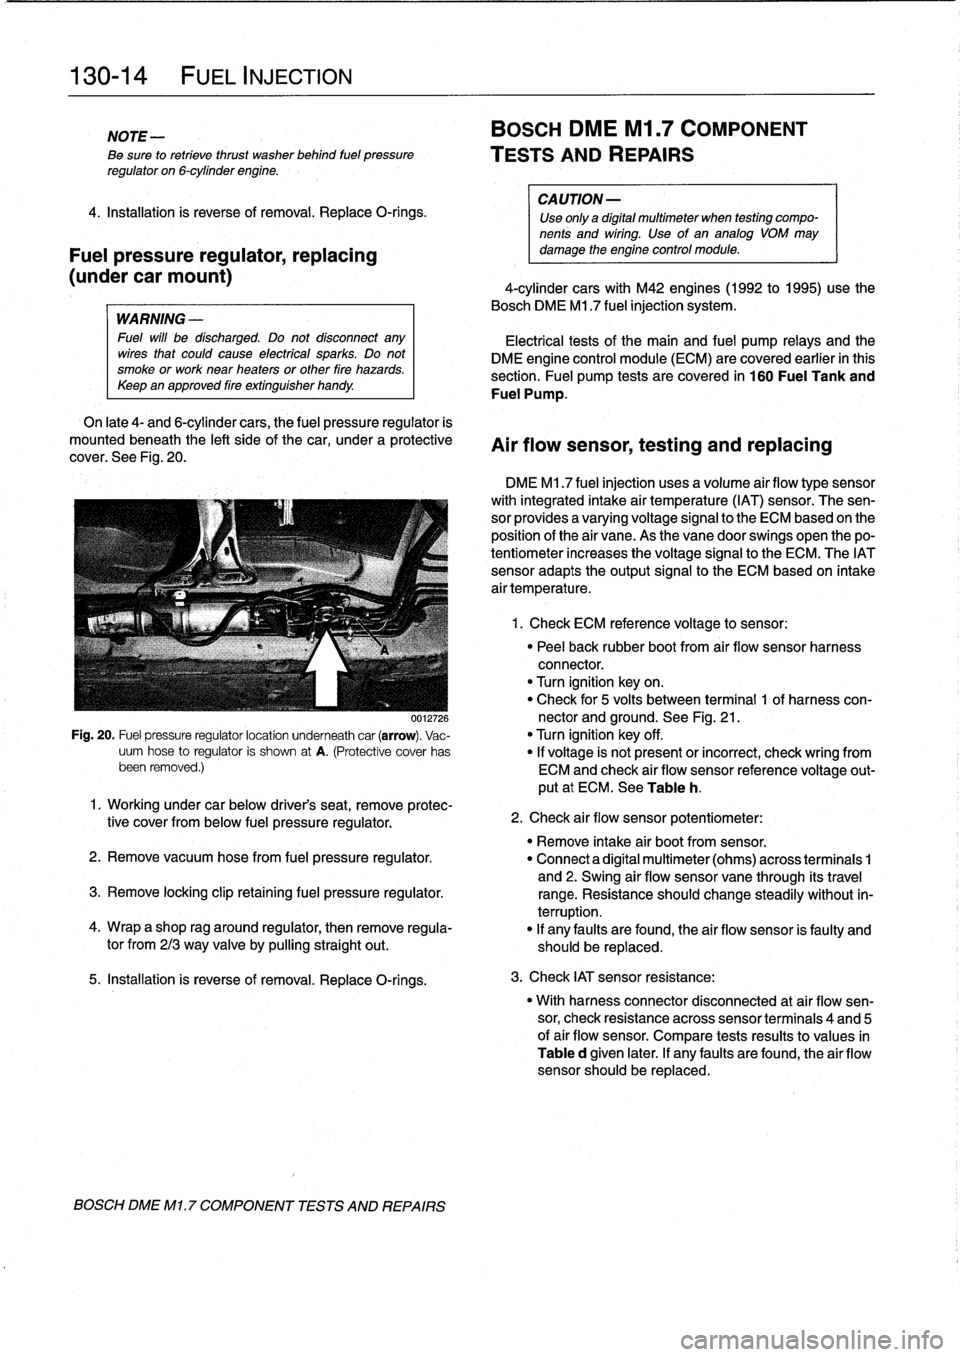 BMW 318i 1997 E36 Workshop Manual 
130-
1
4

	

FUEL
INJECTION

NOTE-

Be
sure
to
retrieve
thrust
washer
behind
fuel
pressure
regulator
on
6-cylinder
engine
.

4
.
Installation
is
reverse
of
removal
.
Replace
O-rings
.

Fuel
pressure
